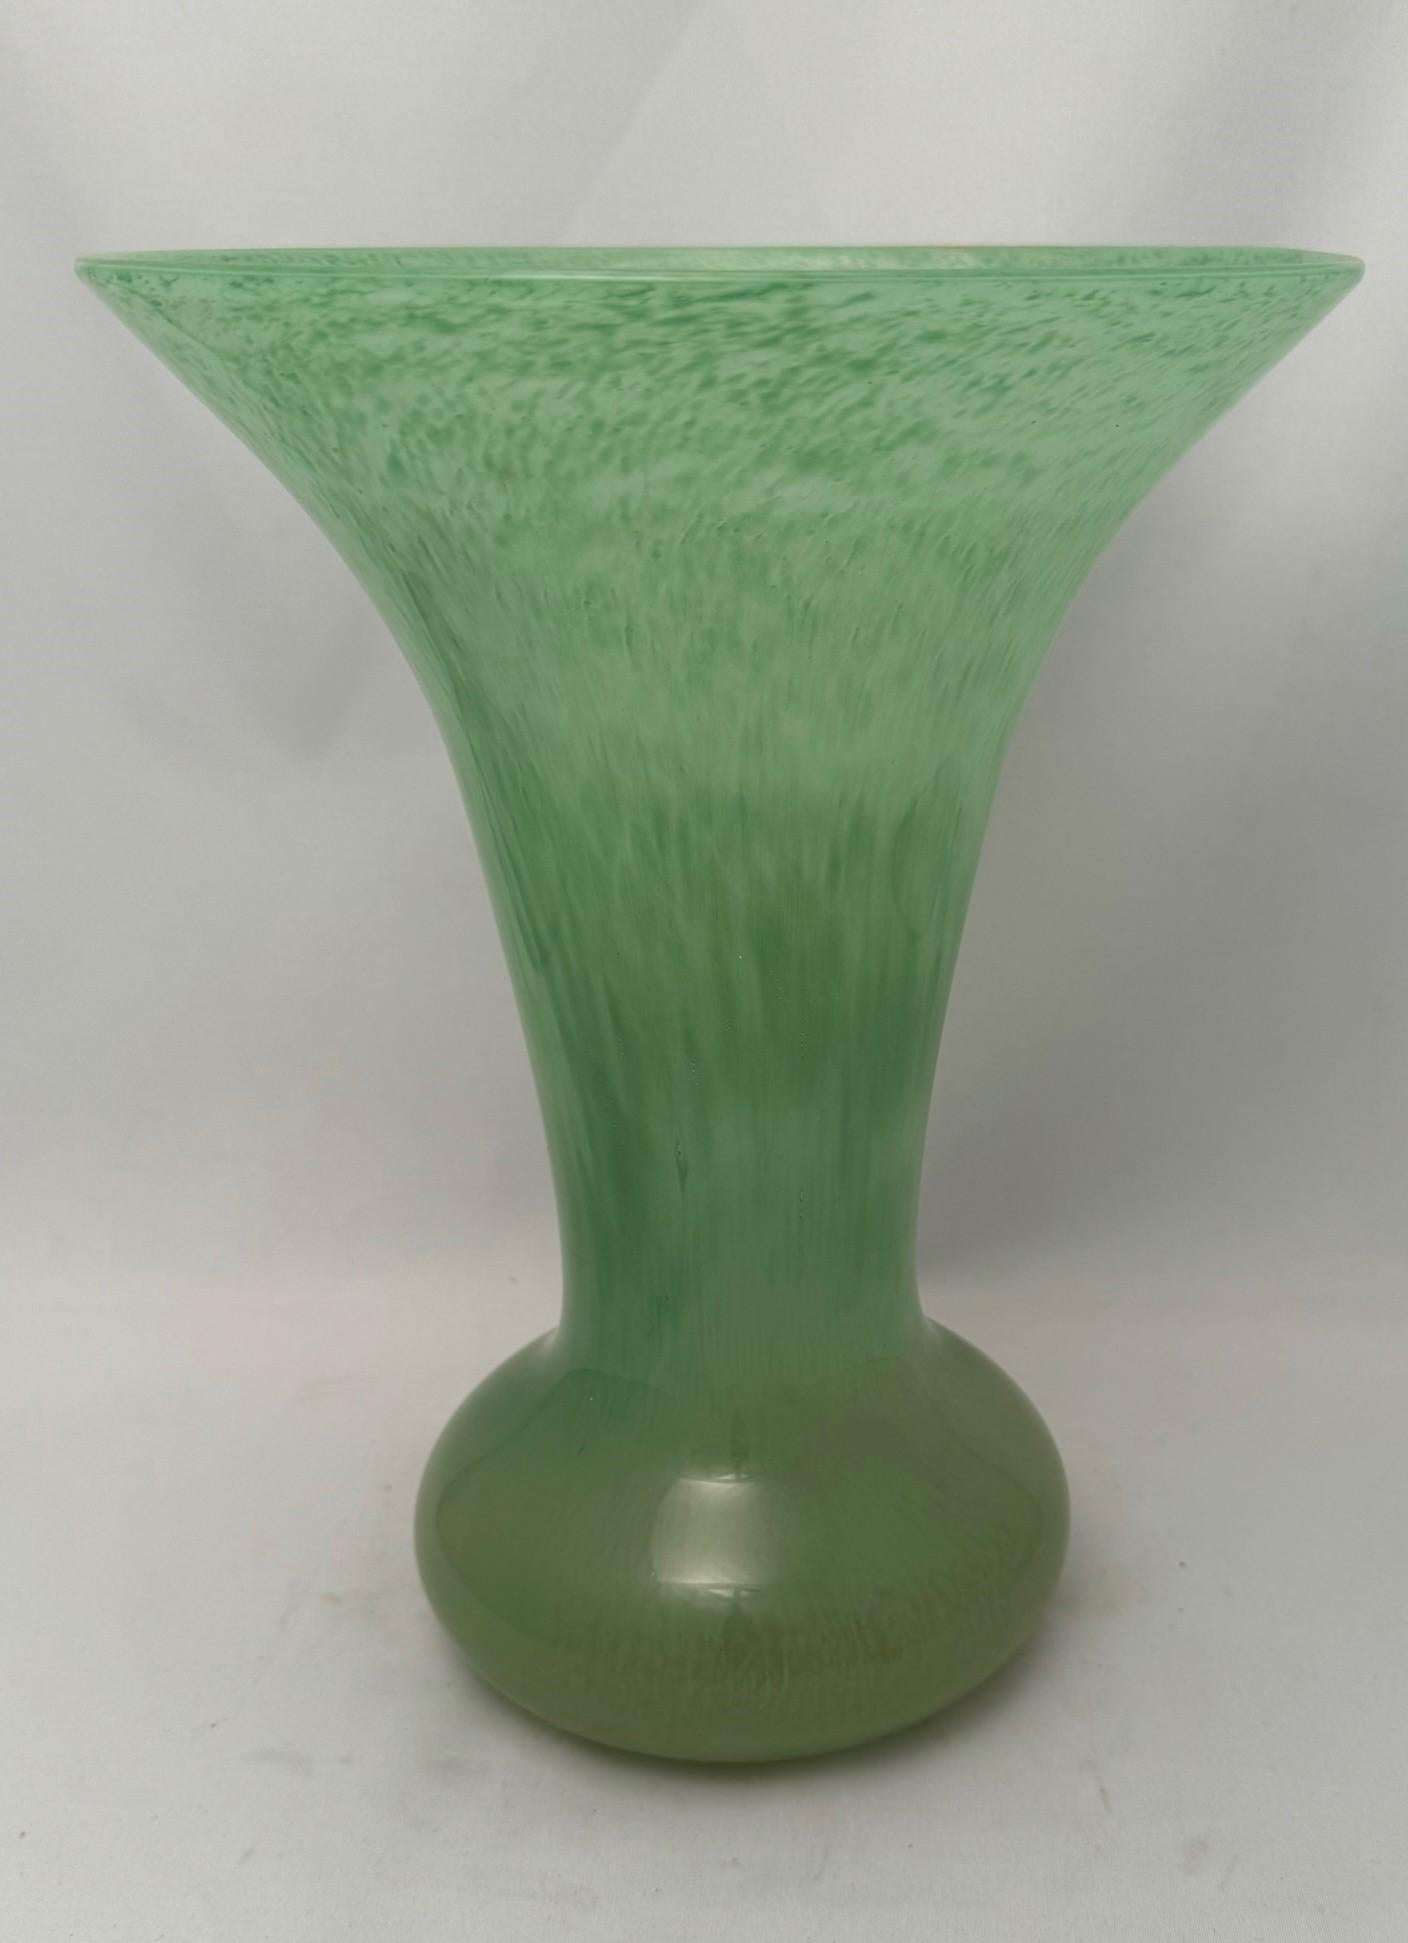 Scottish Monart Green Art Glass Vase In Excellent Condition For Sale In Montreal, QC